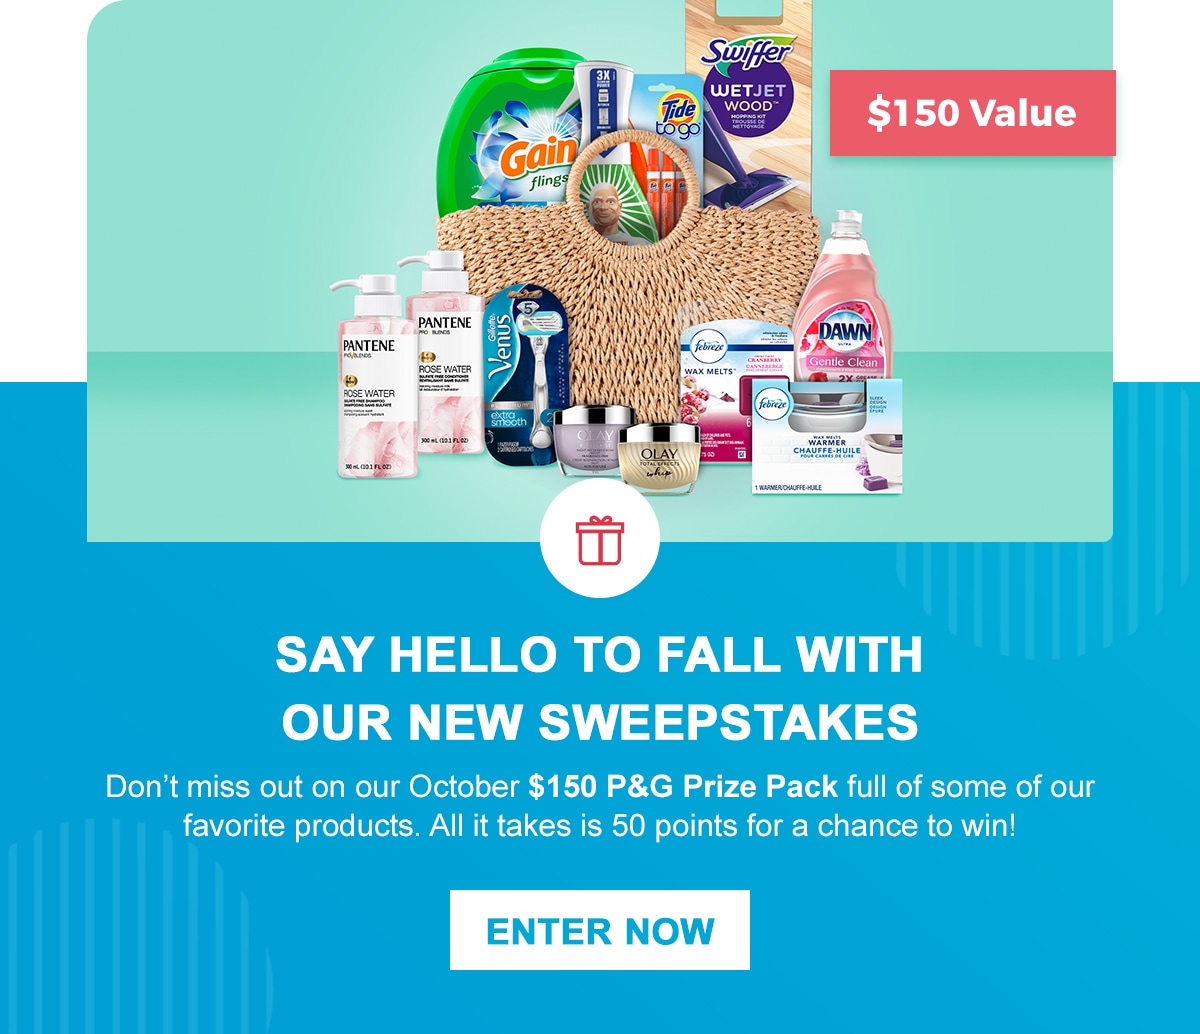 Don’t miss out on our October $150 P&G Prize Pack full of some of our favorite products. All it takes is 50 points for a chance to win! 